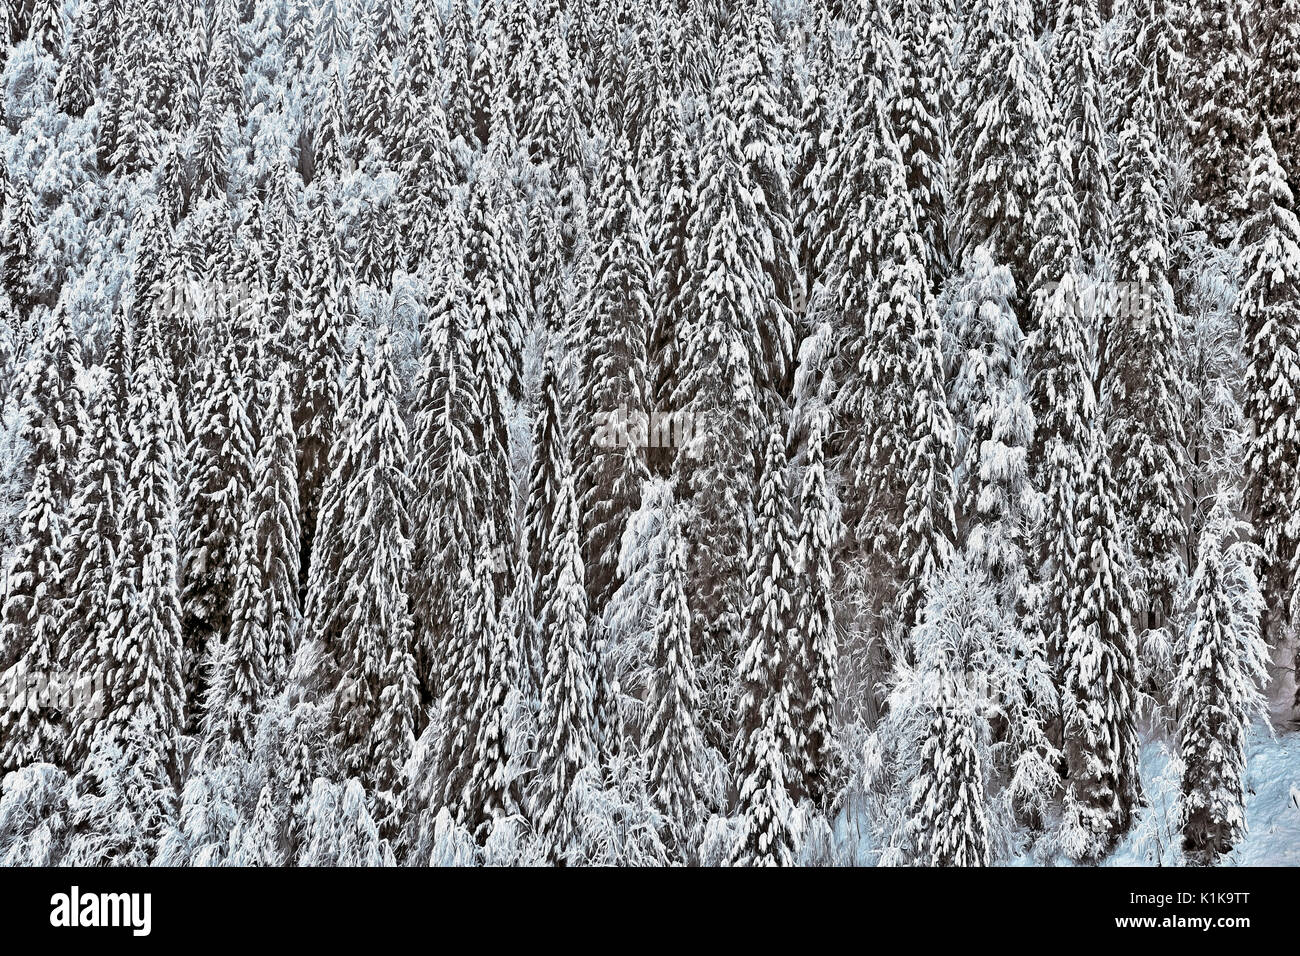 Panoramic view of an Winter Forest with large spruce trees covered in fresh snow. Stock Photo